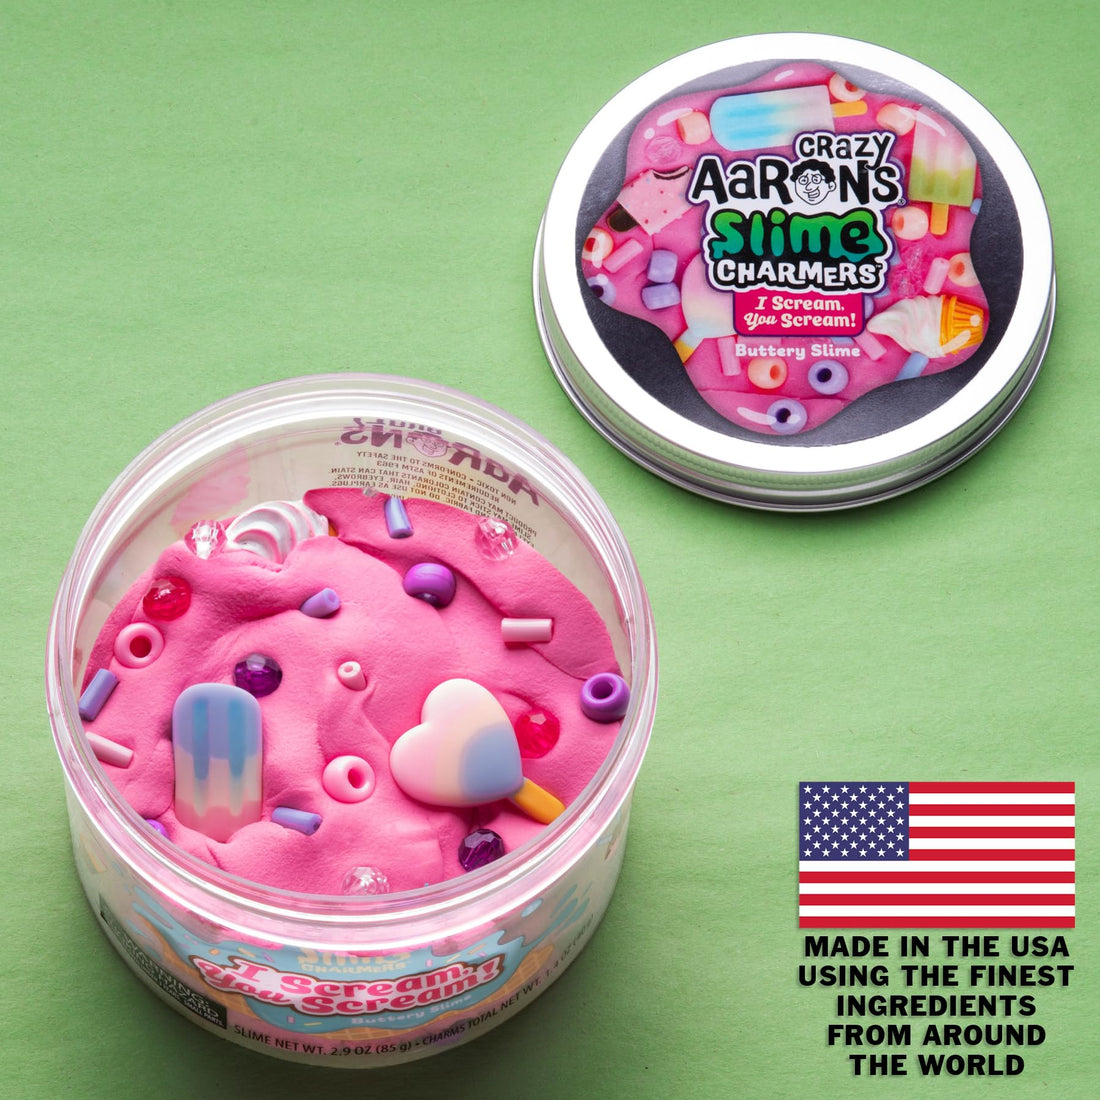 Slime Charmers Scented Putty